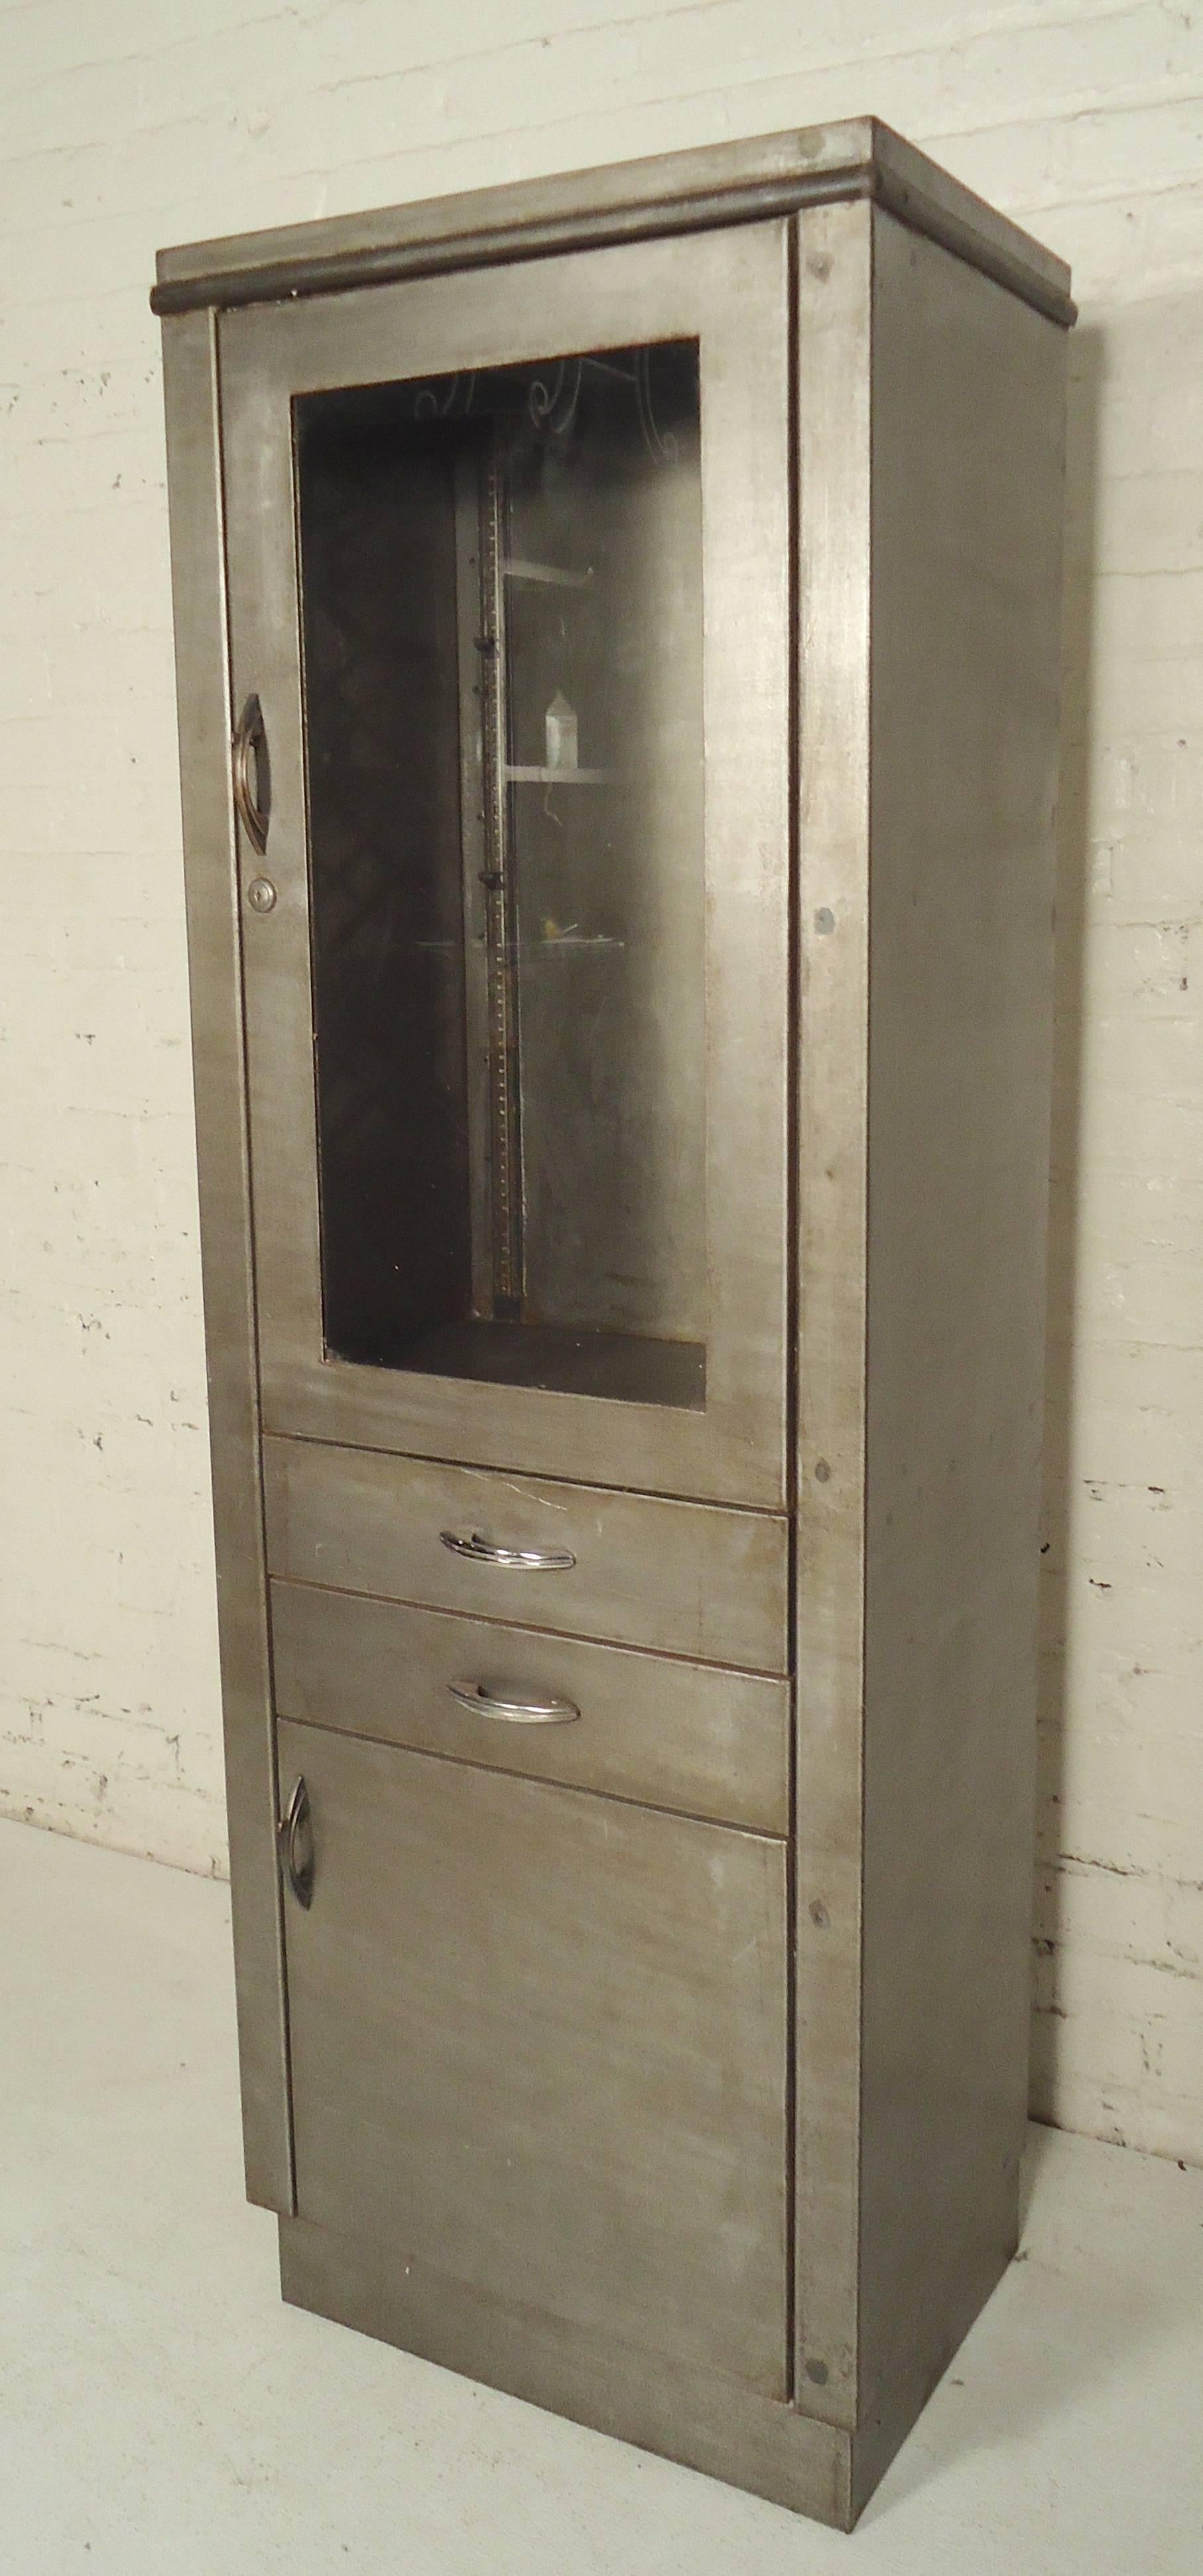 Doctors cabinet with glass front and bottom storage. Piece has been refinished in a bare metal style.

(Please confirm item location - NY or NJ - with dealer)
   